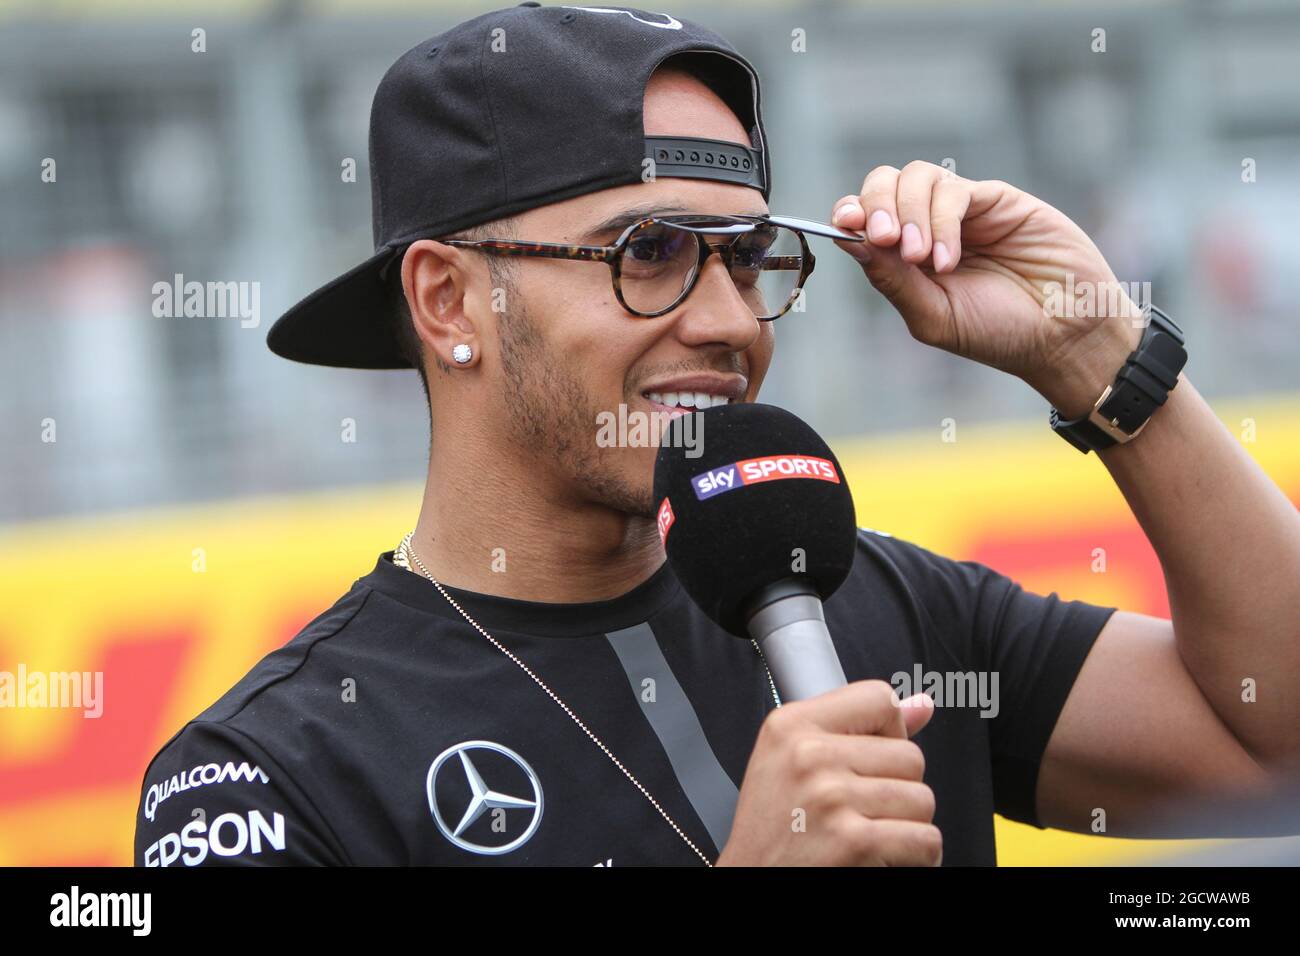 Russell reflects on 'frustrating' Saudi Arabian Grand Prix as Hamilton  predicts 'challenging' races ahead for Mercedes | Formula 1®